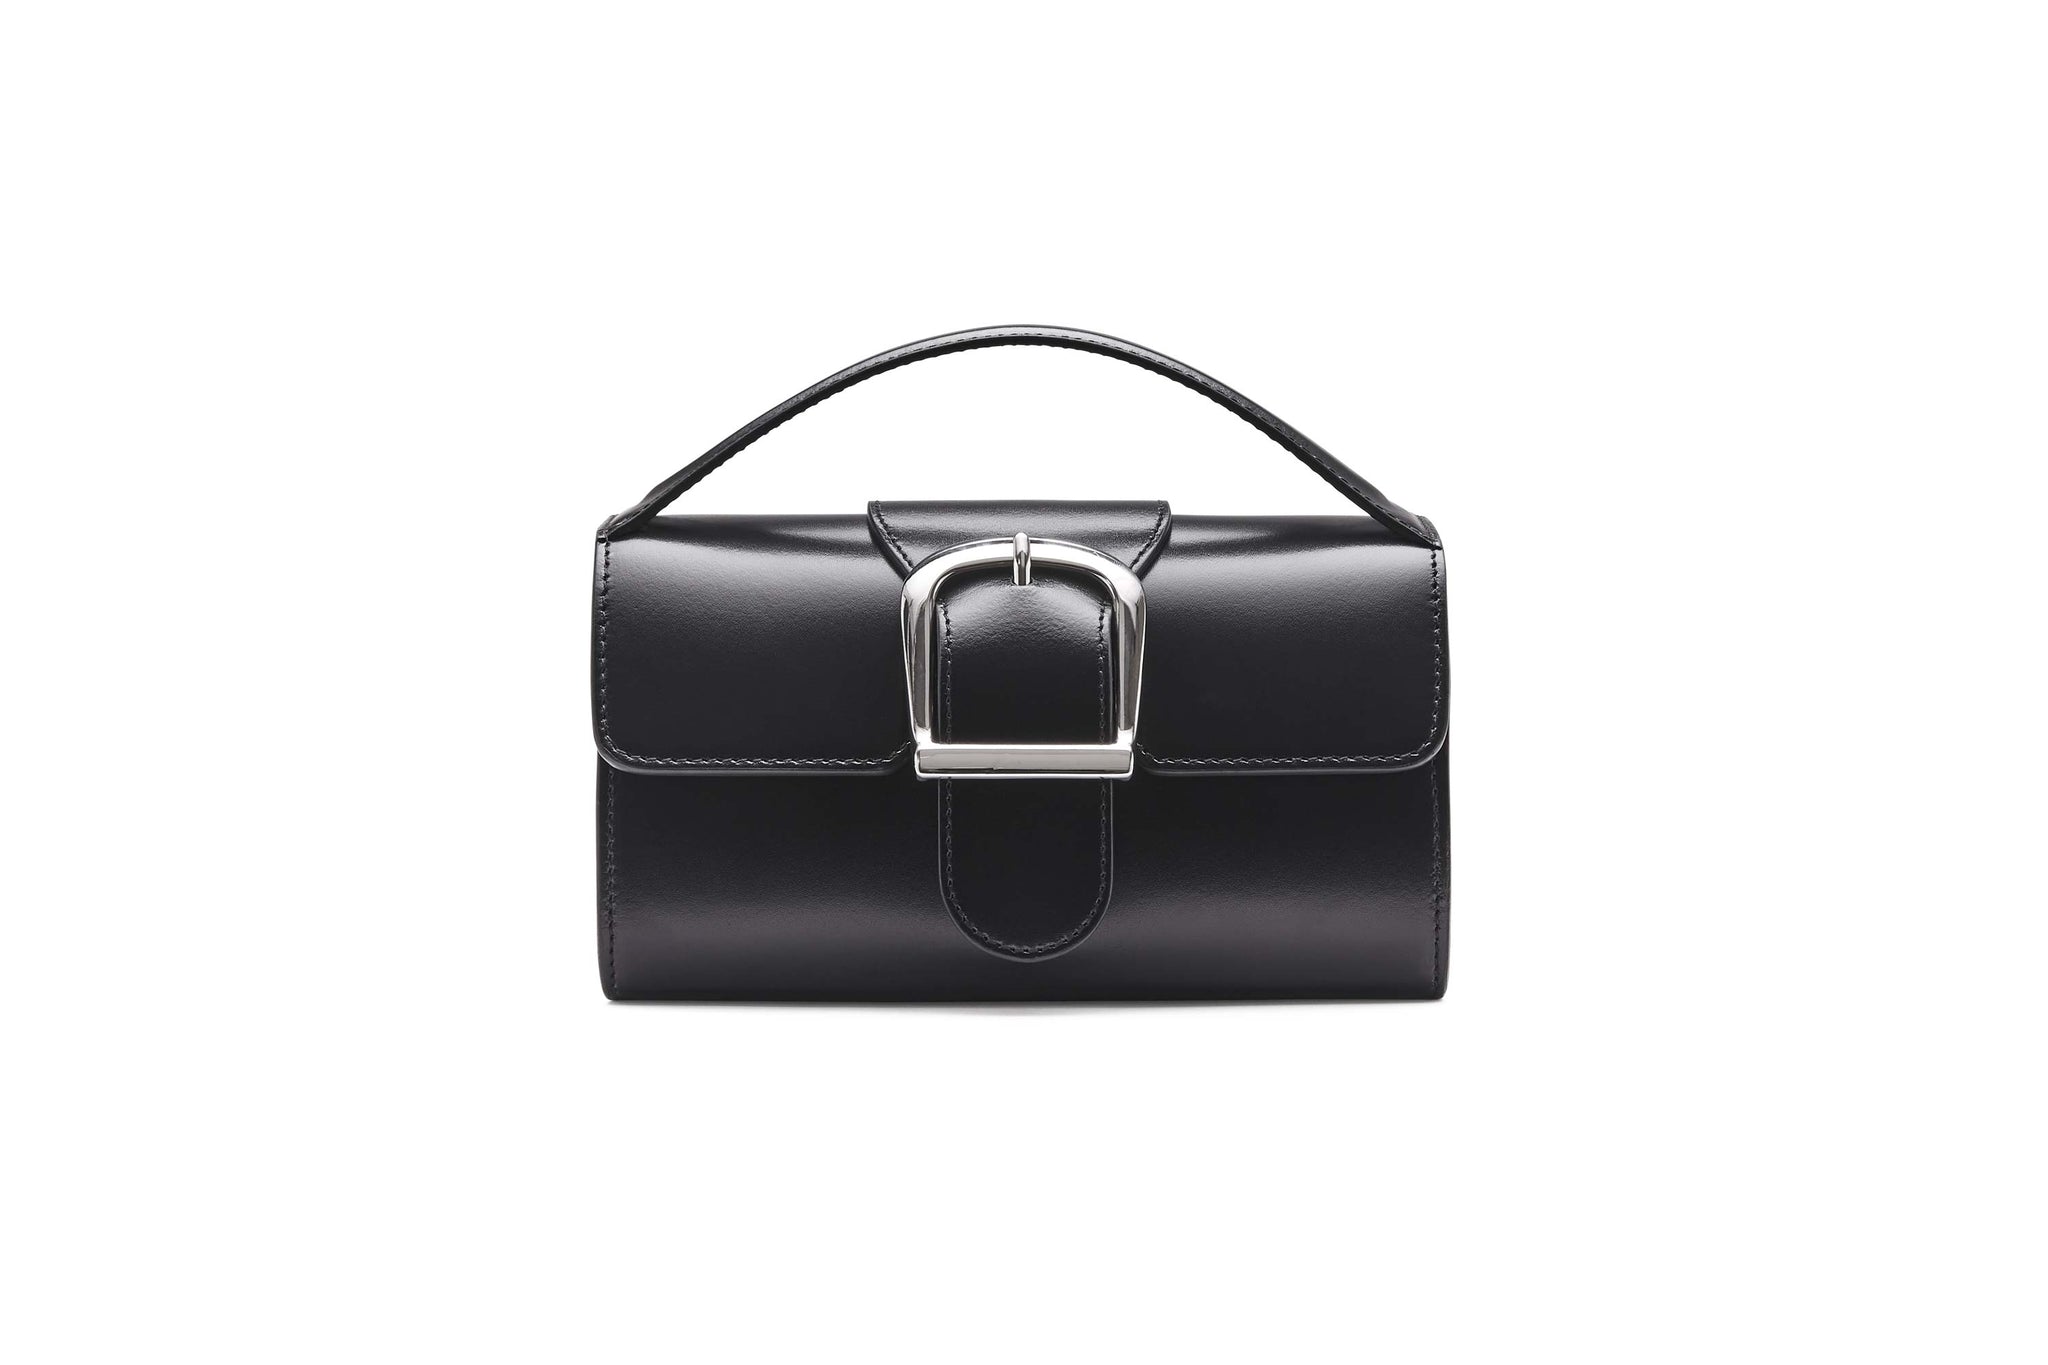 Rylan, Rylan Studio, Black Mini Satchel with Flat Handle and Silver Buckle, Made in Italy